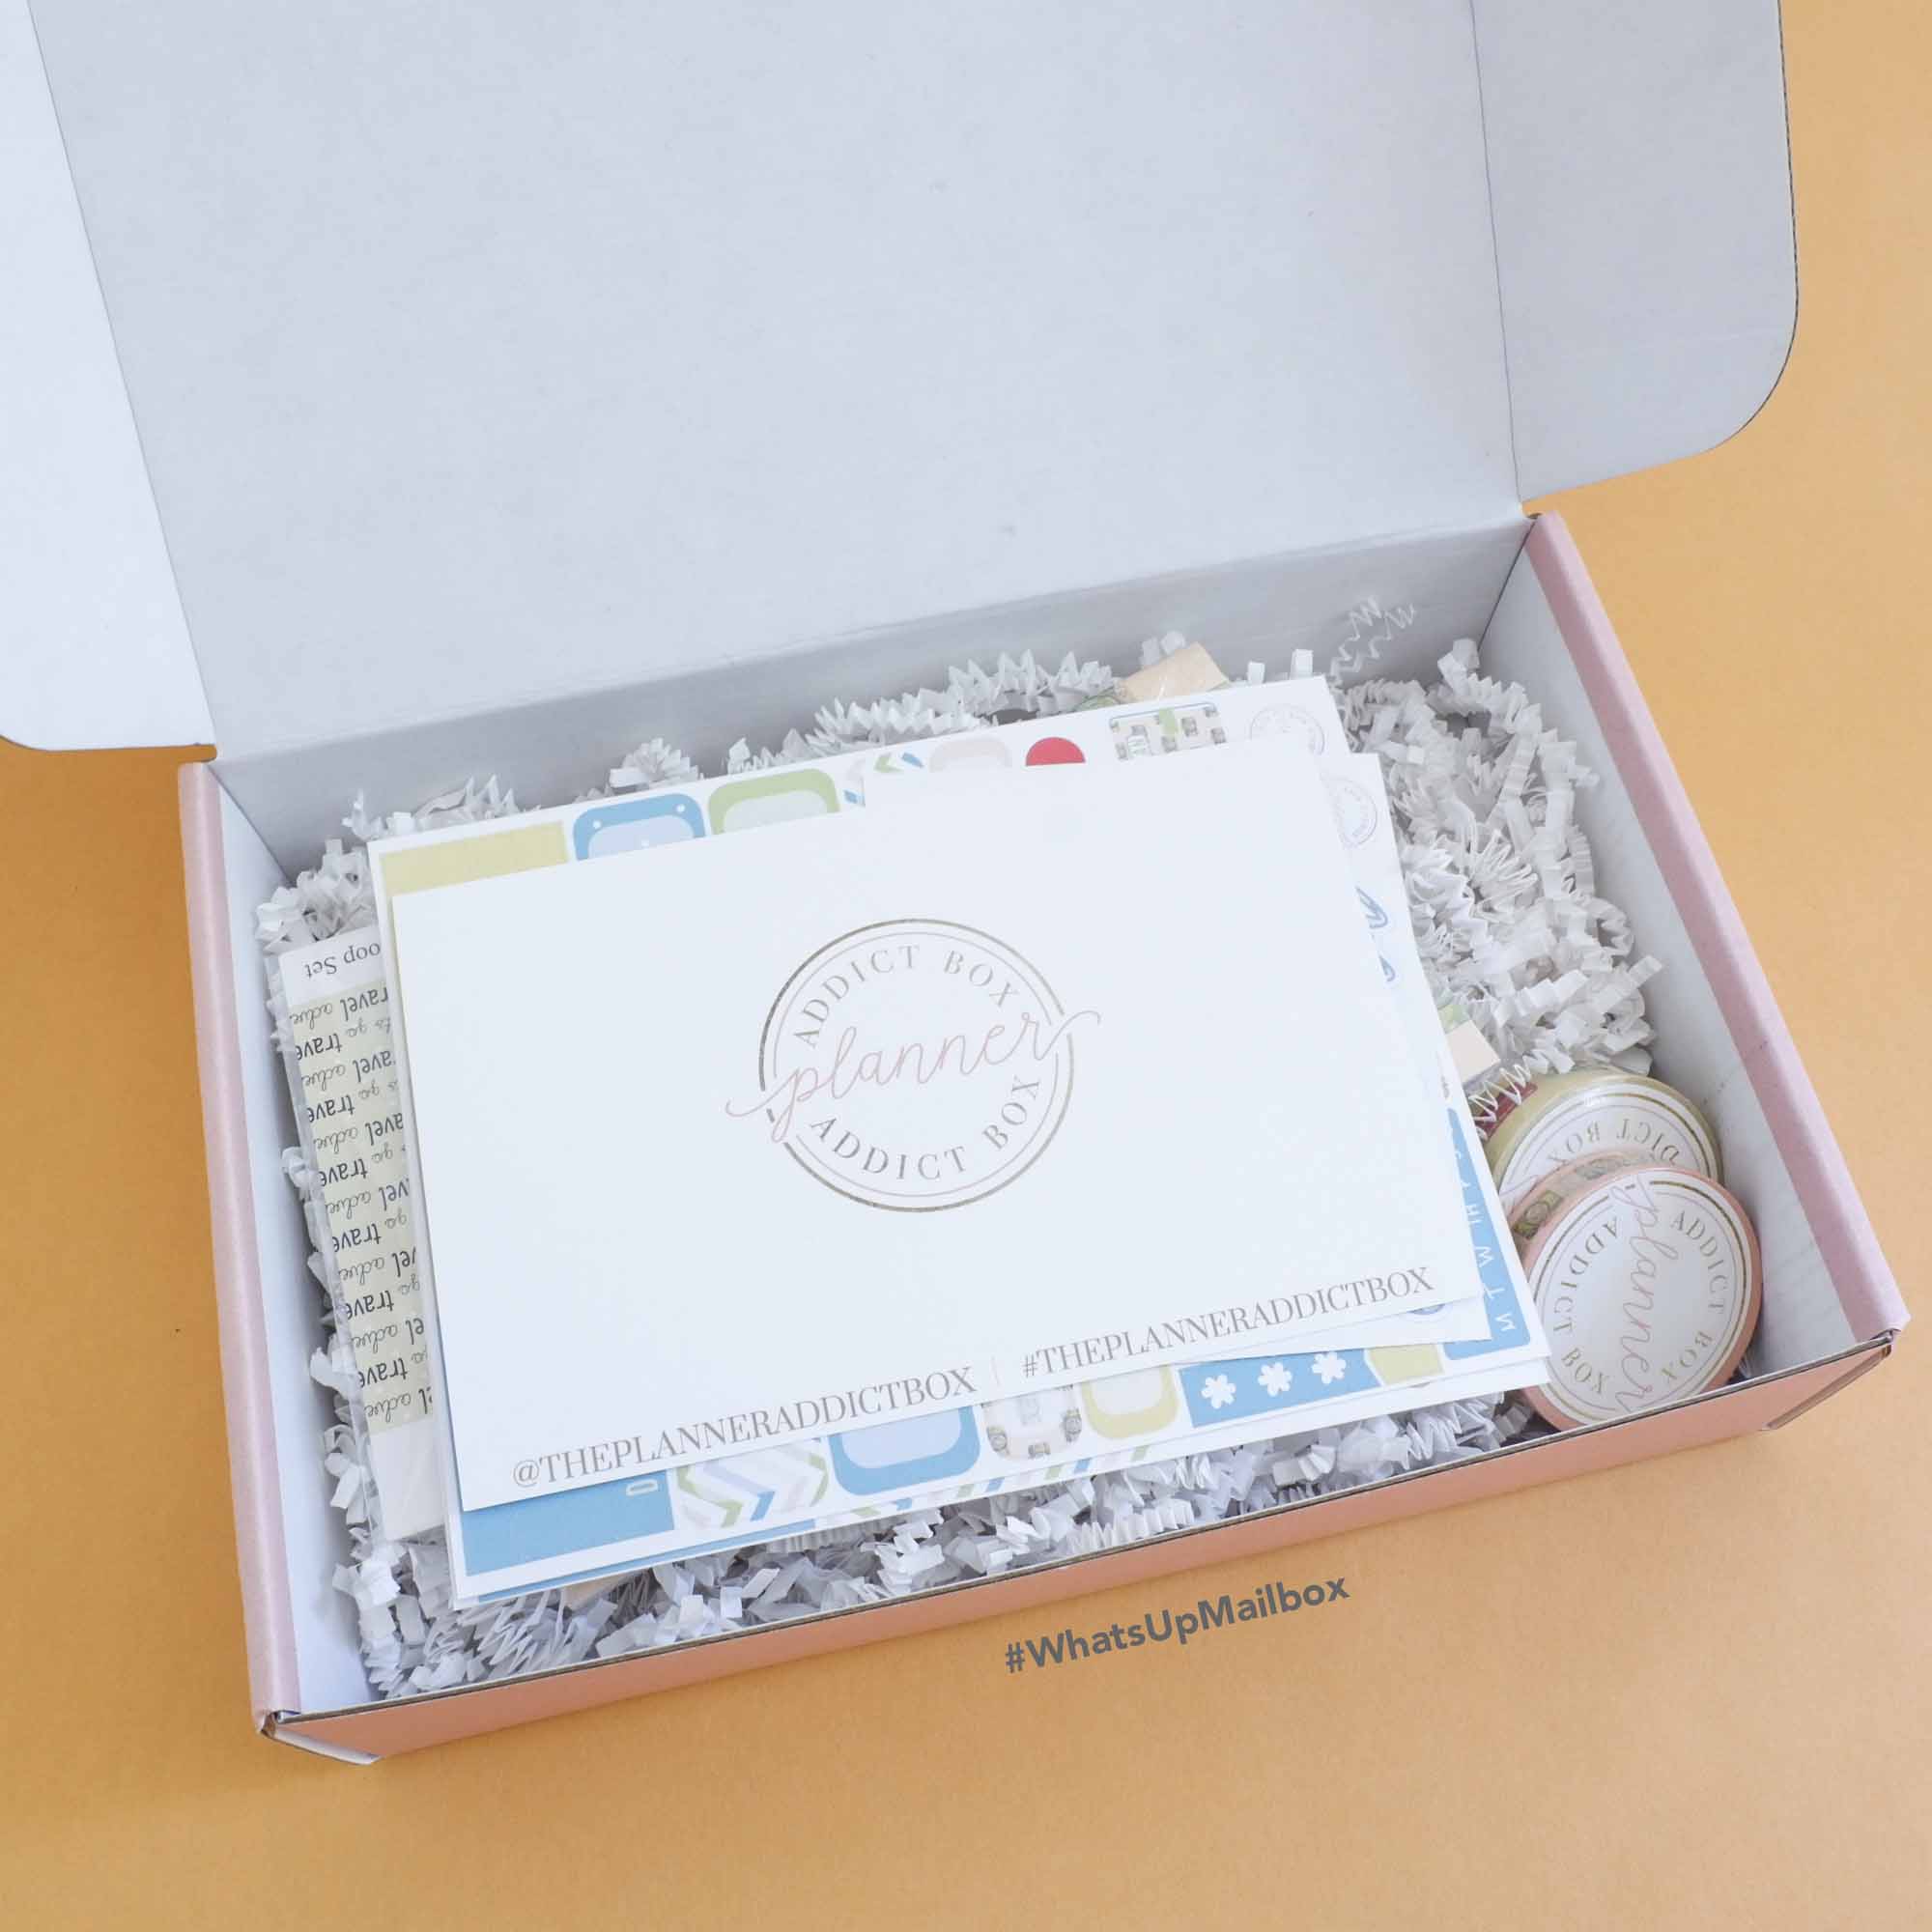 The Planner Addict Box - First look at unboxing